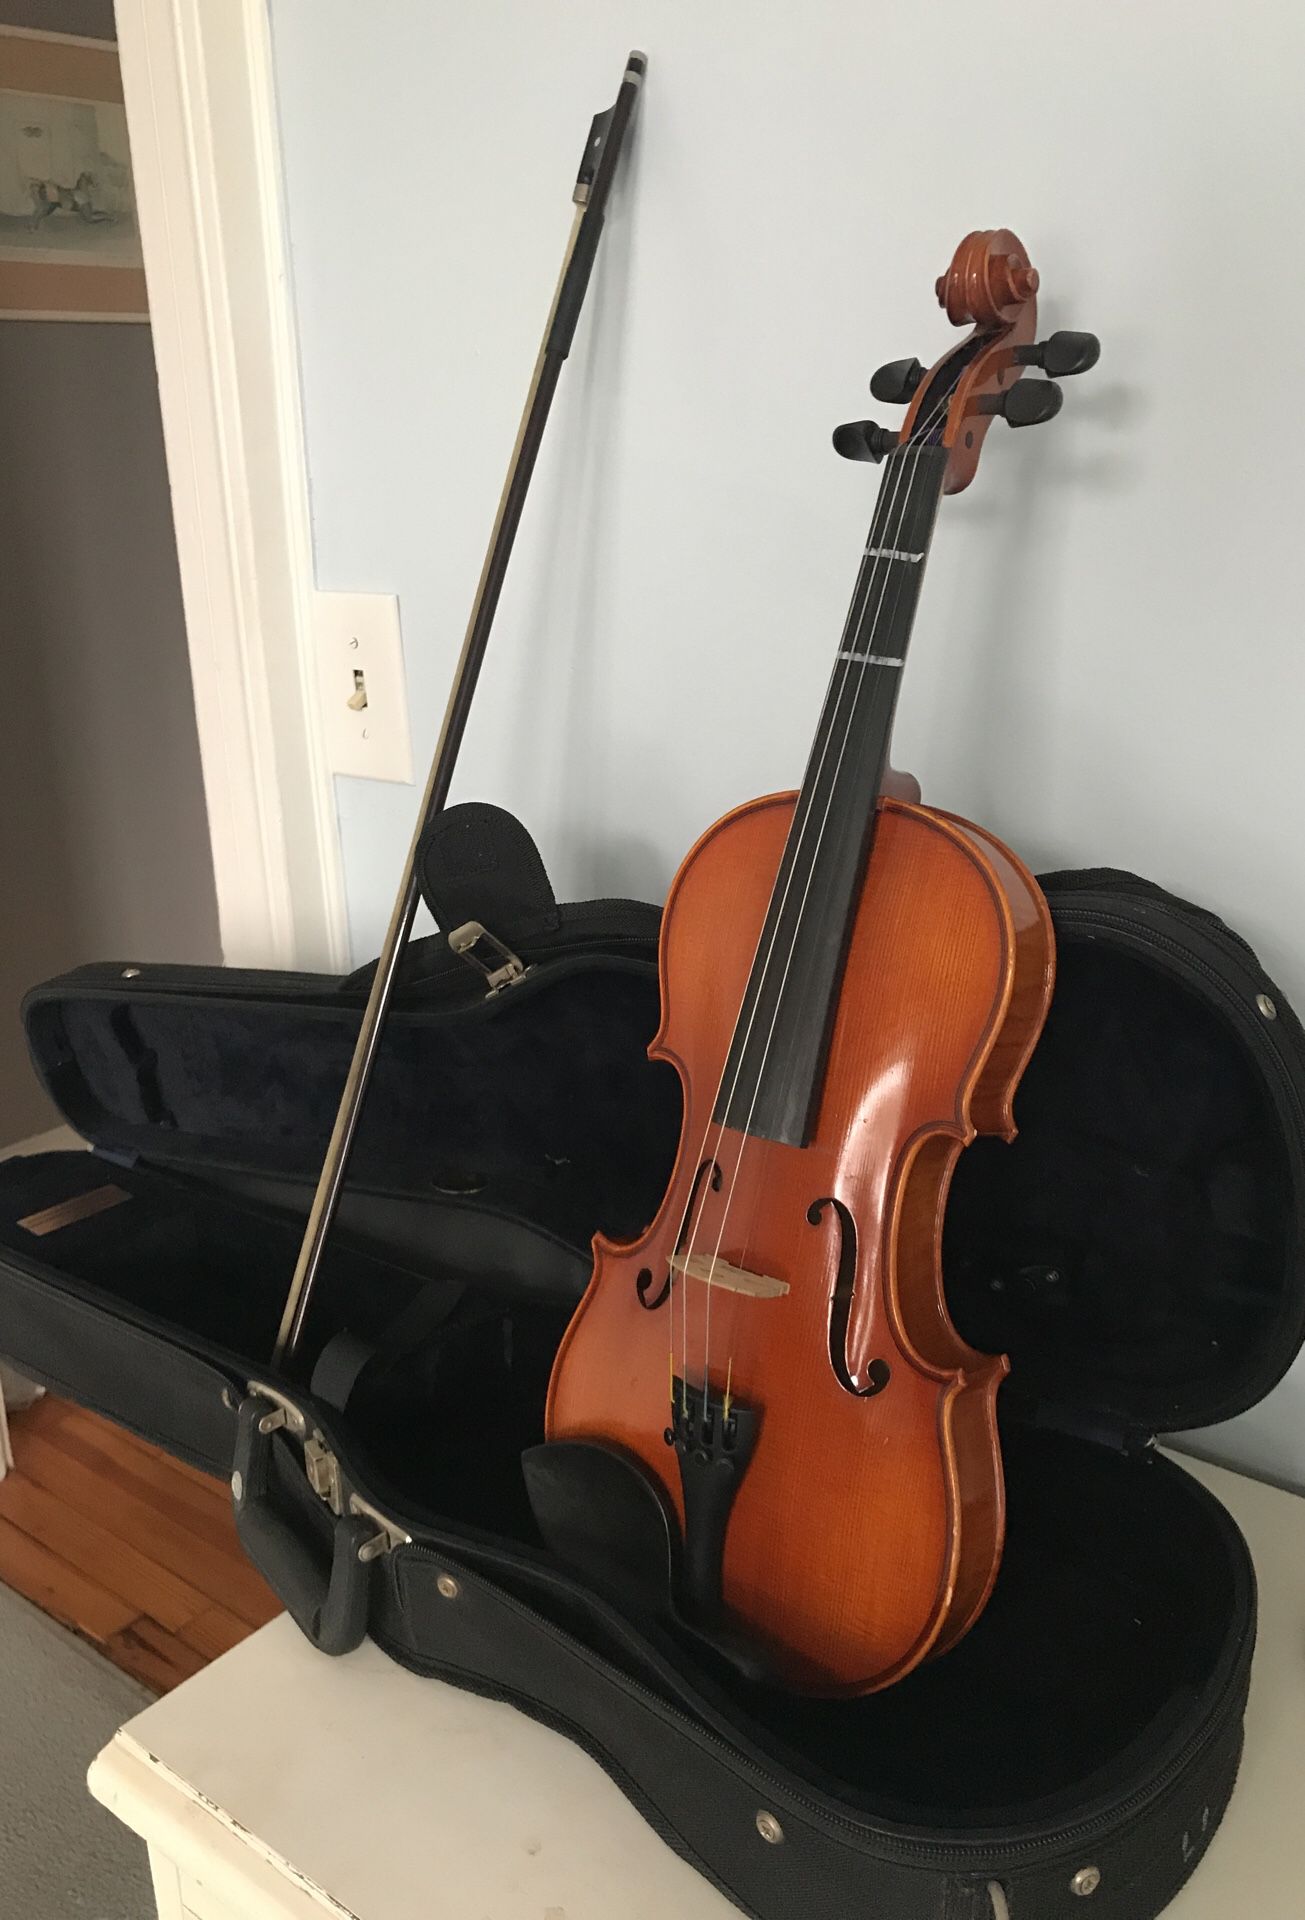 Violin, bow and case Samuel Eastman No. Vl 100 size 4/4 year 2005